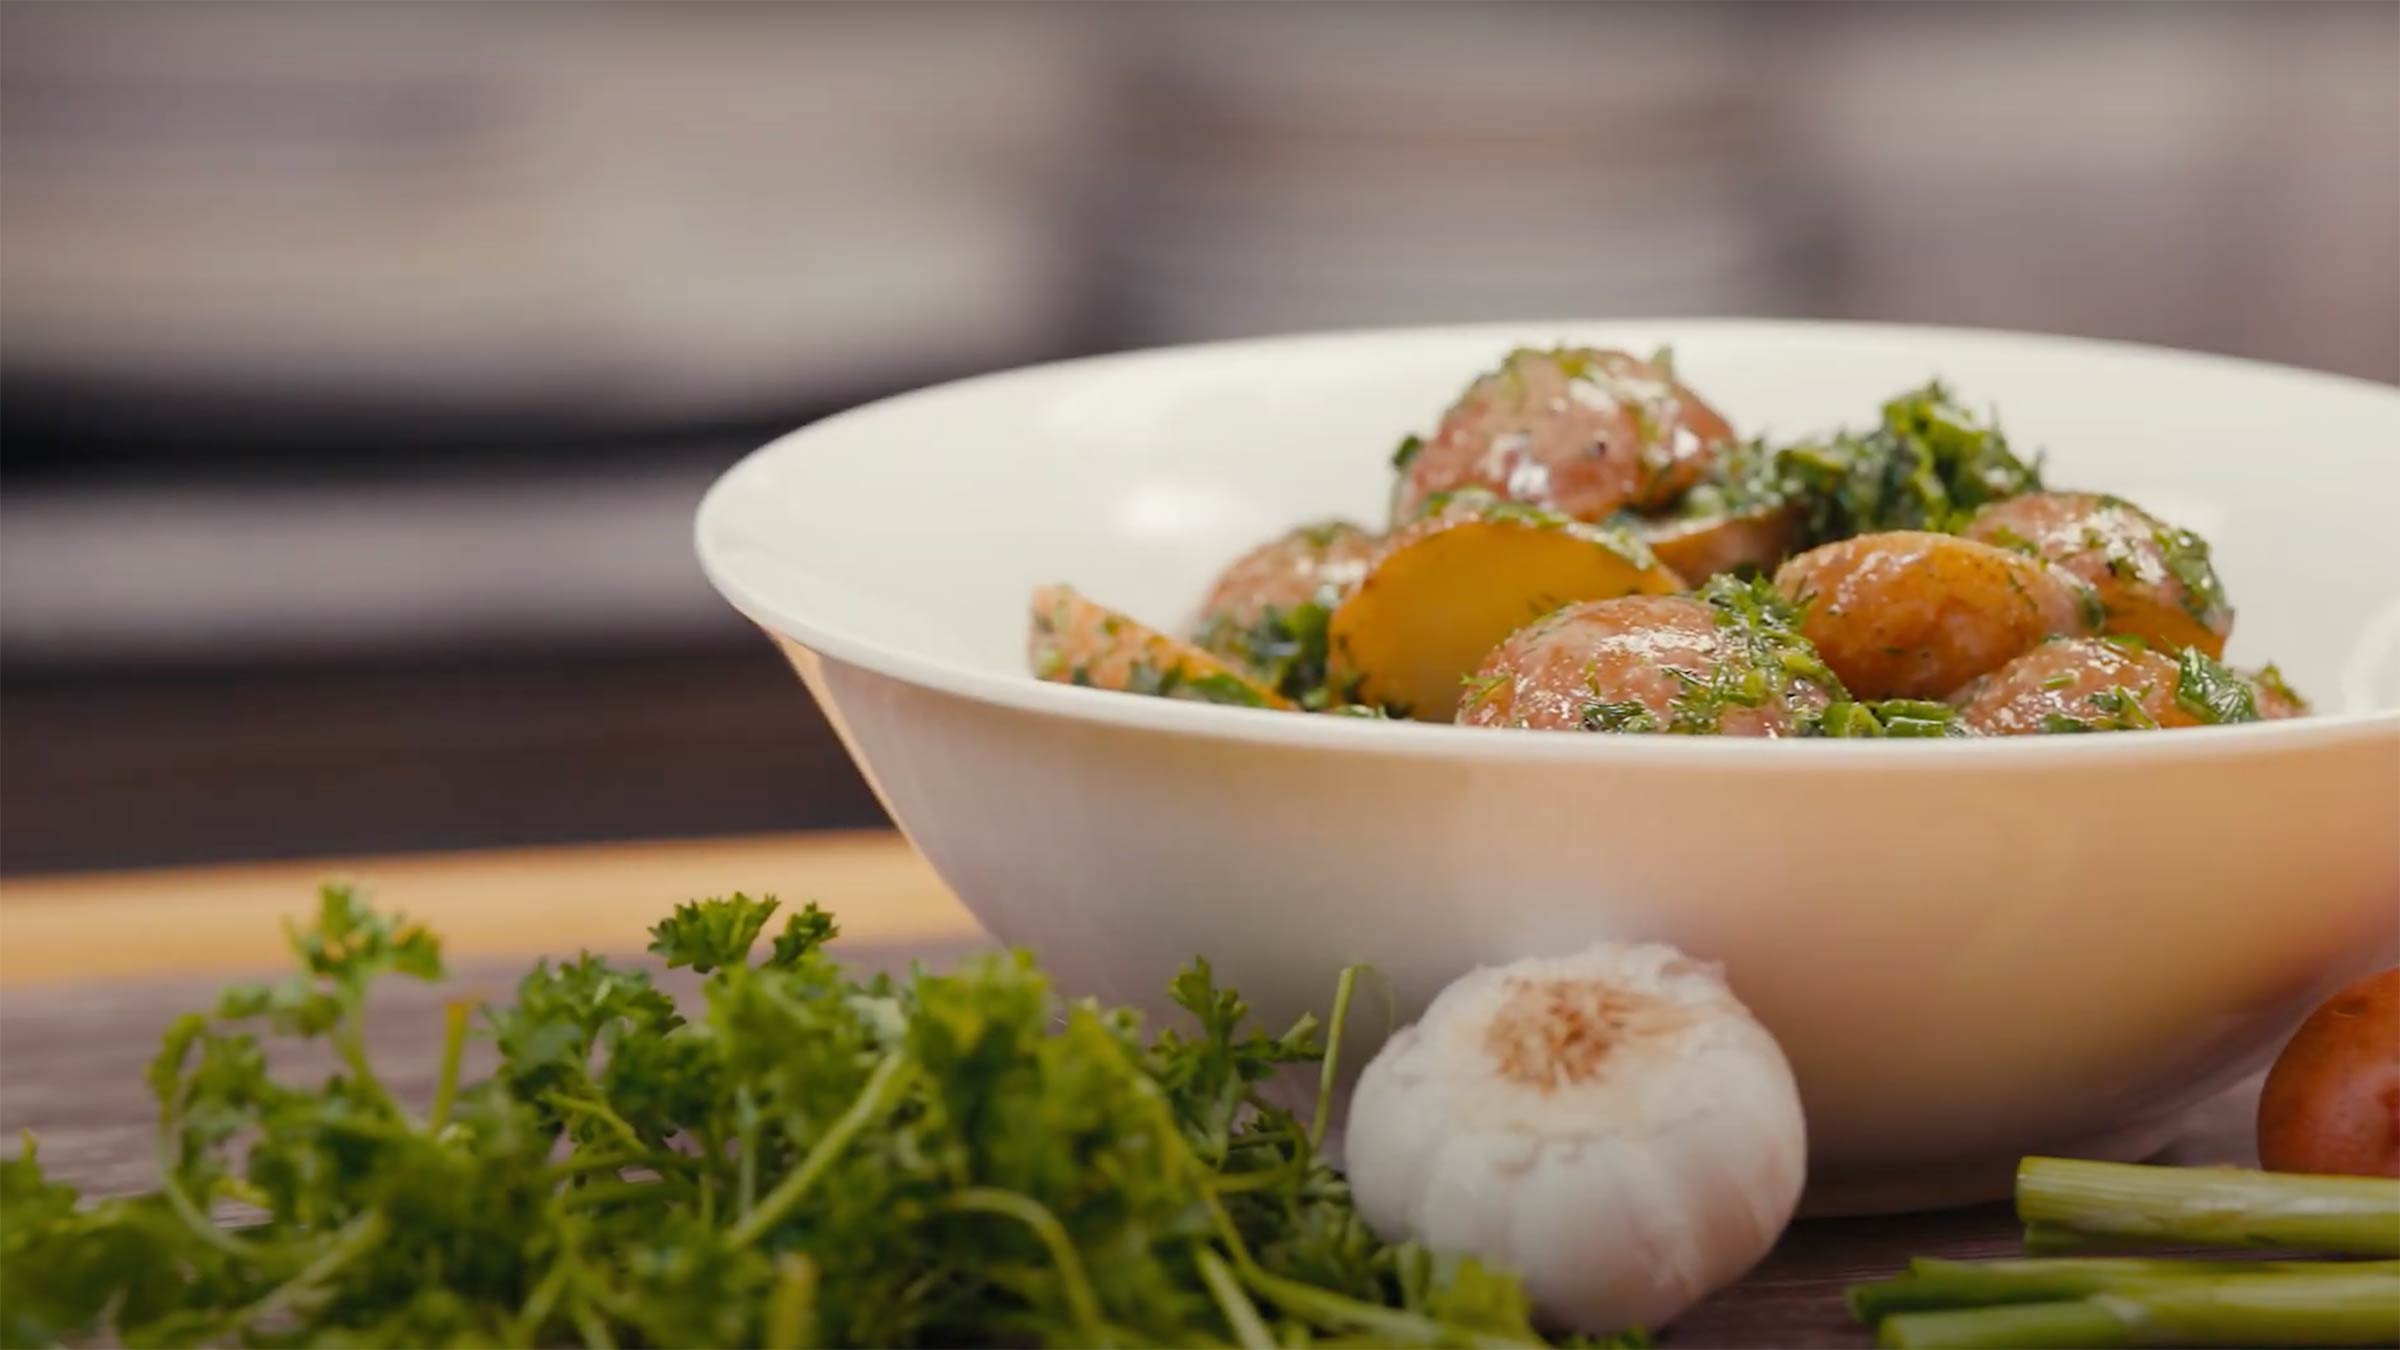 Recipe from our chefs: Red potato salad without mayo